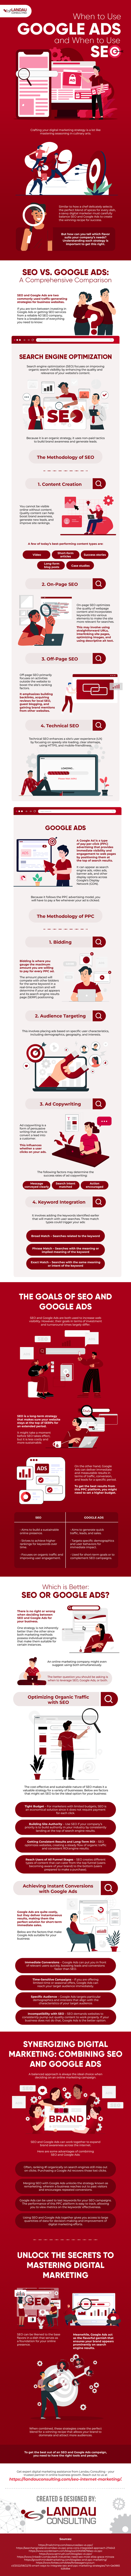 When to Use Google Ads and When to Use SEO Infographic Image